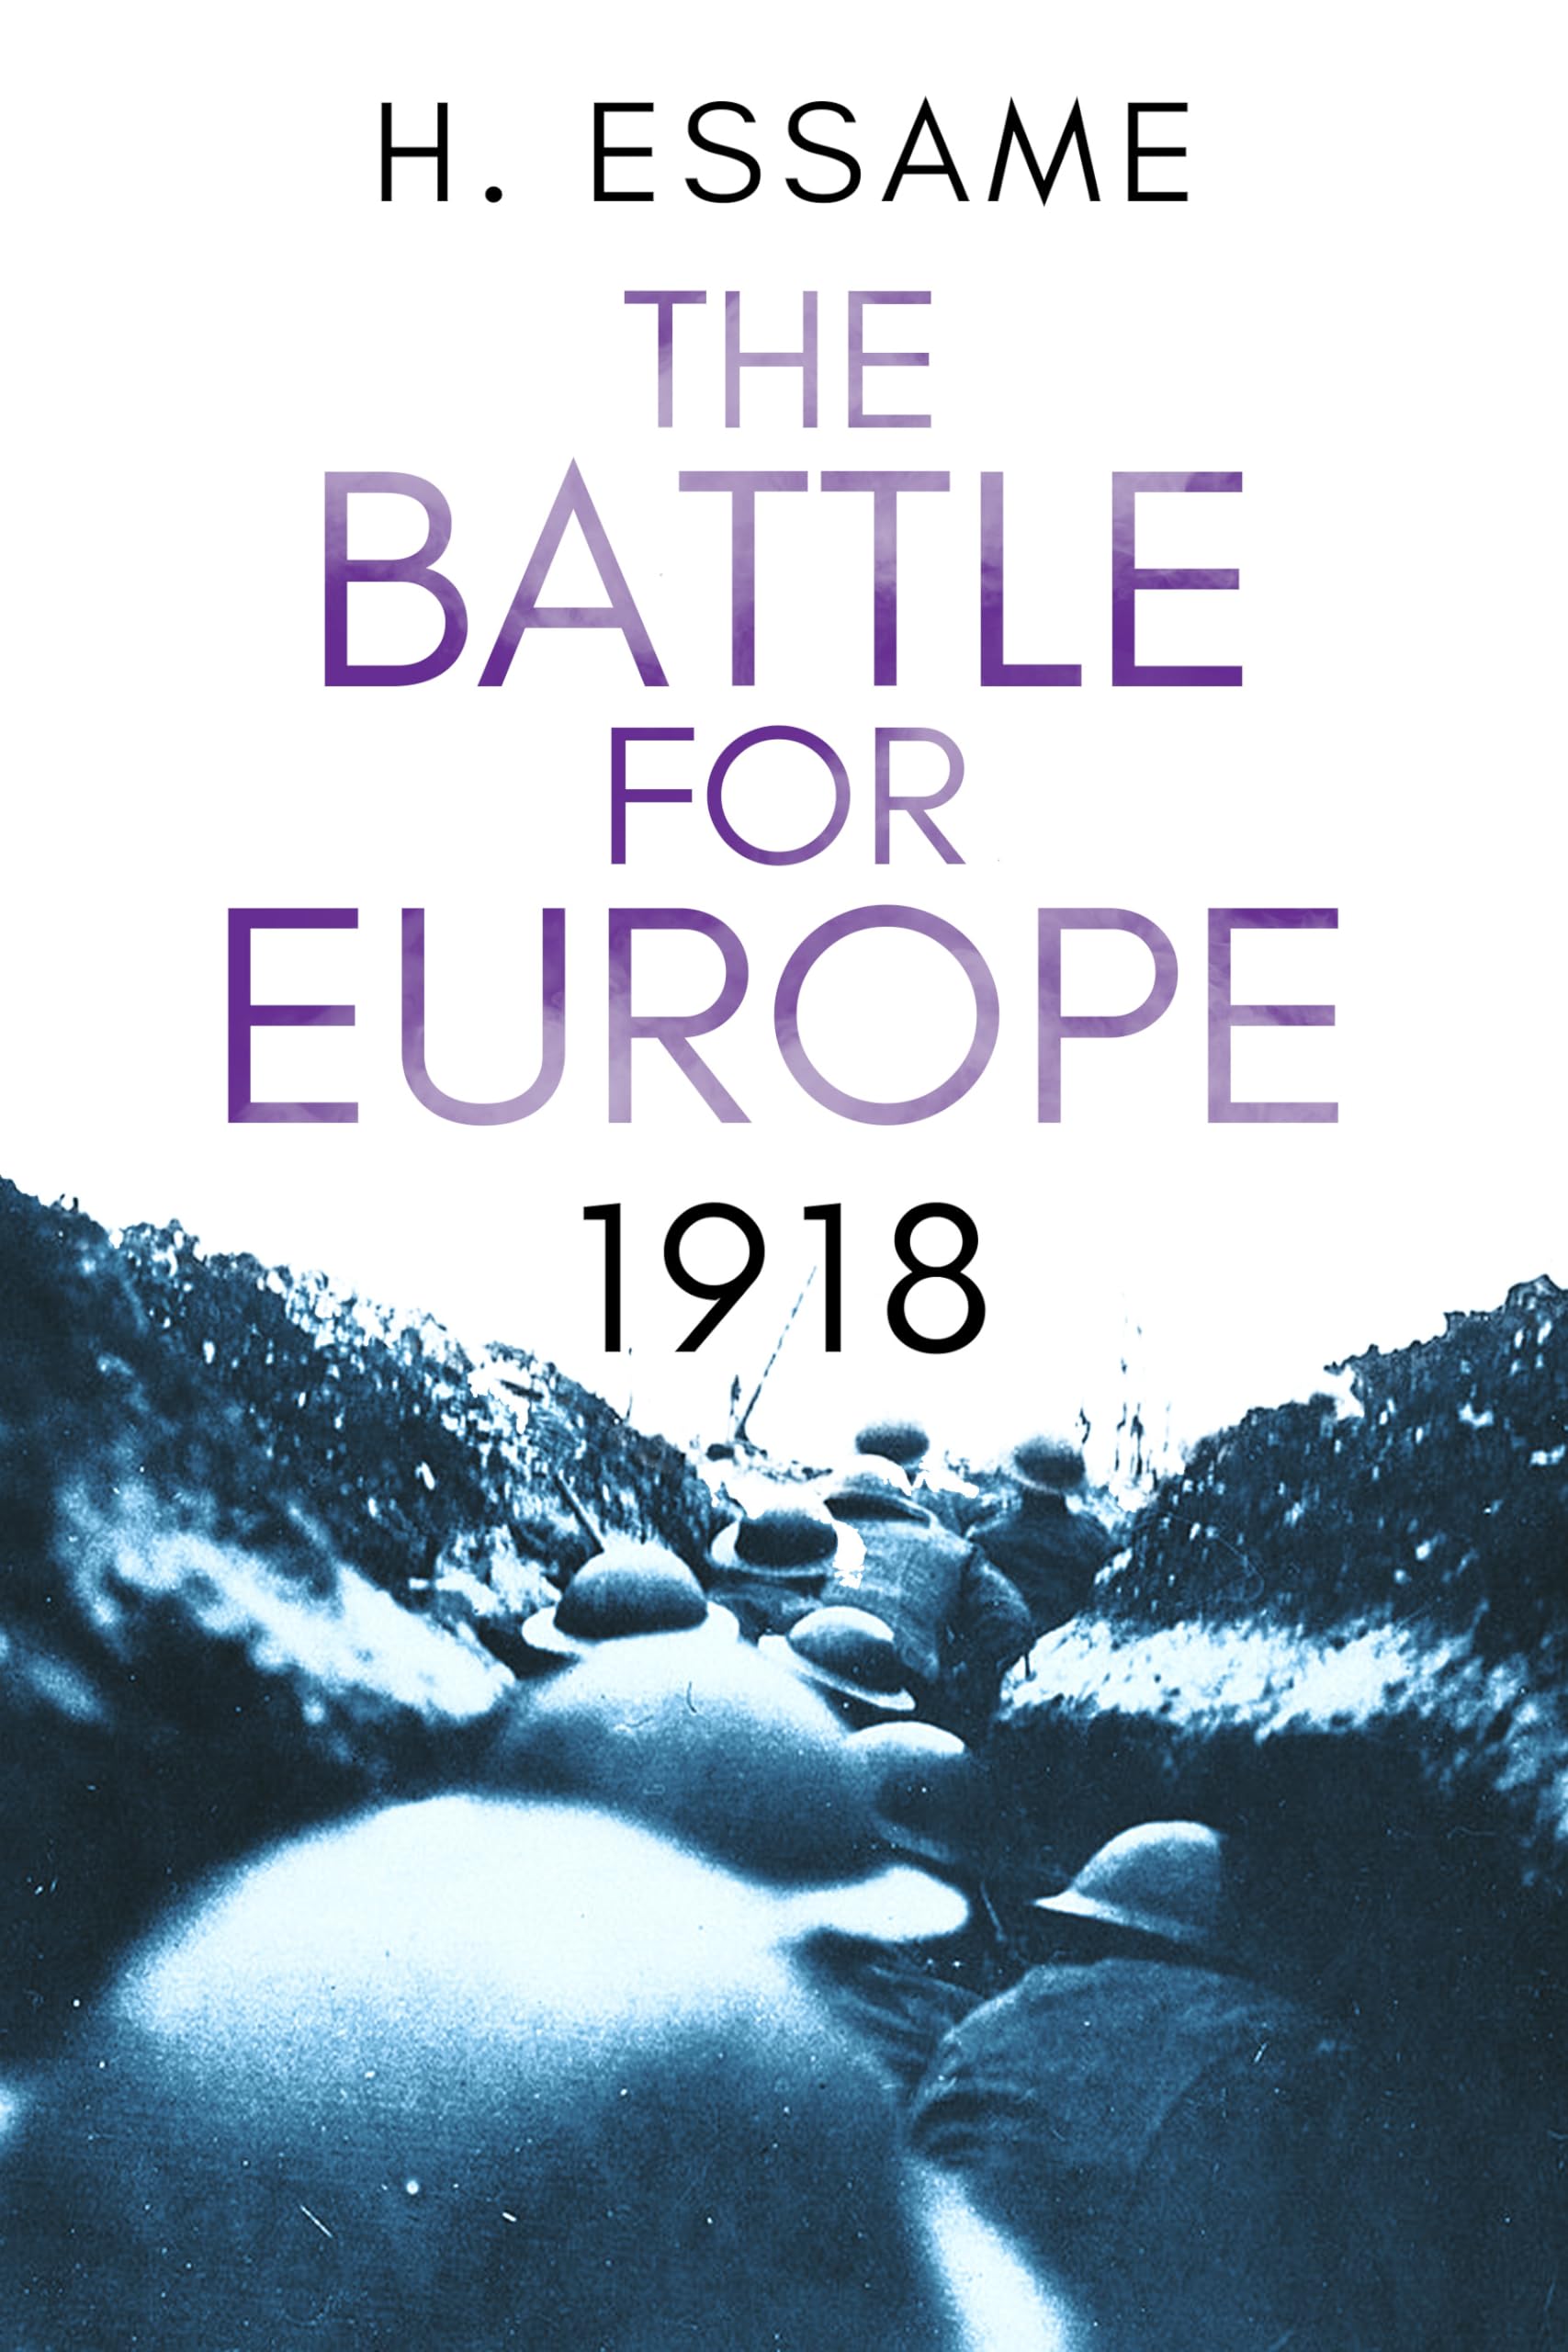 The Battle for Europe, 1918 (The Final Months of War)